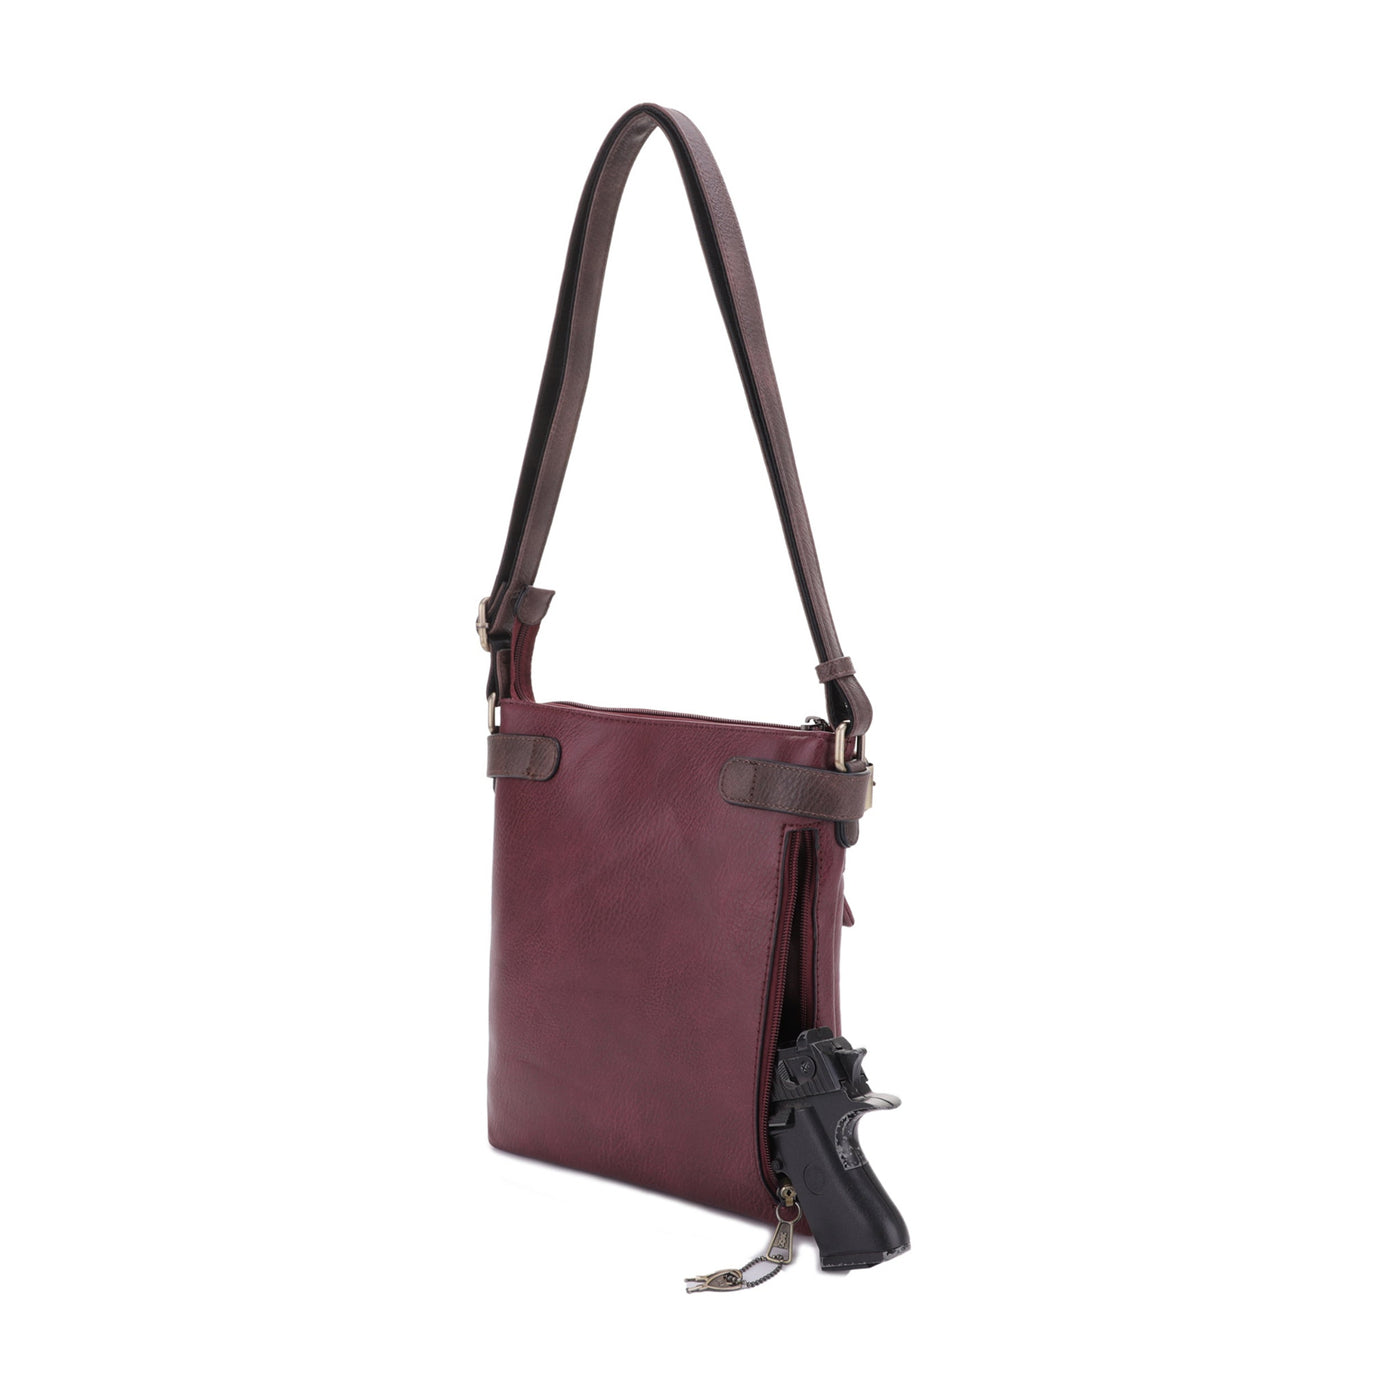 Hannah Concealed Carry Lock and Key Crossbody